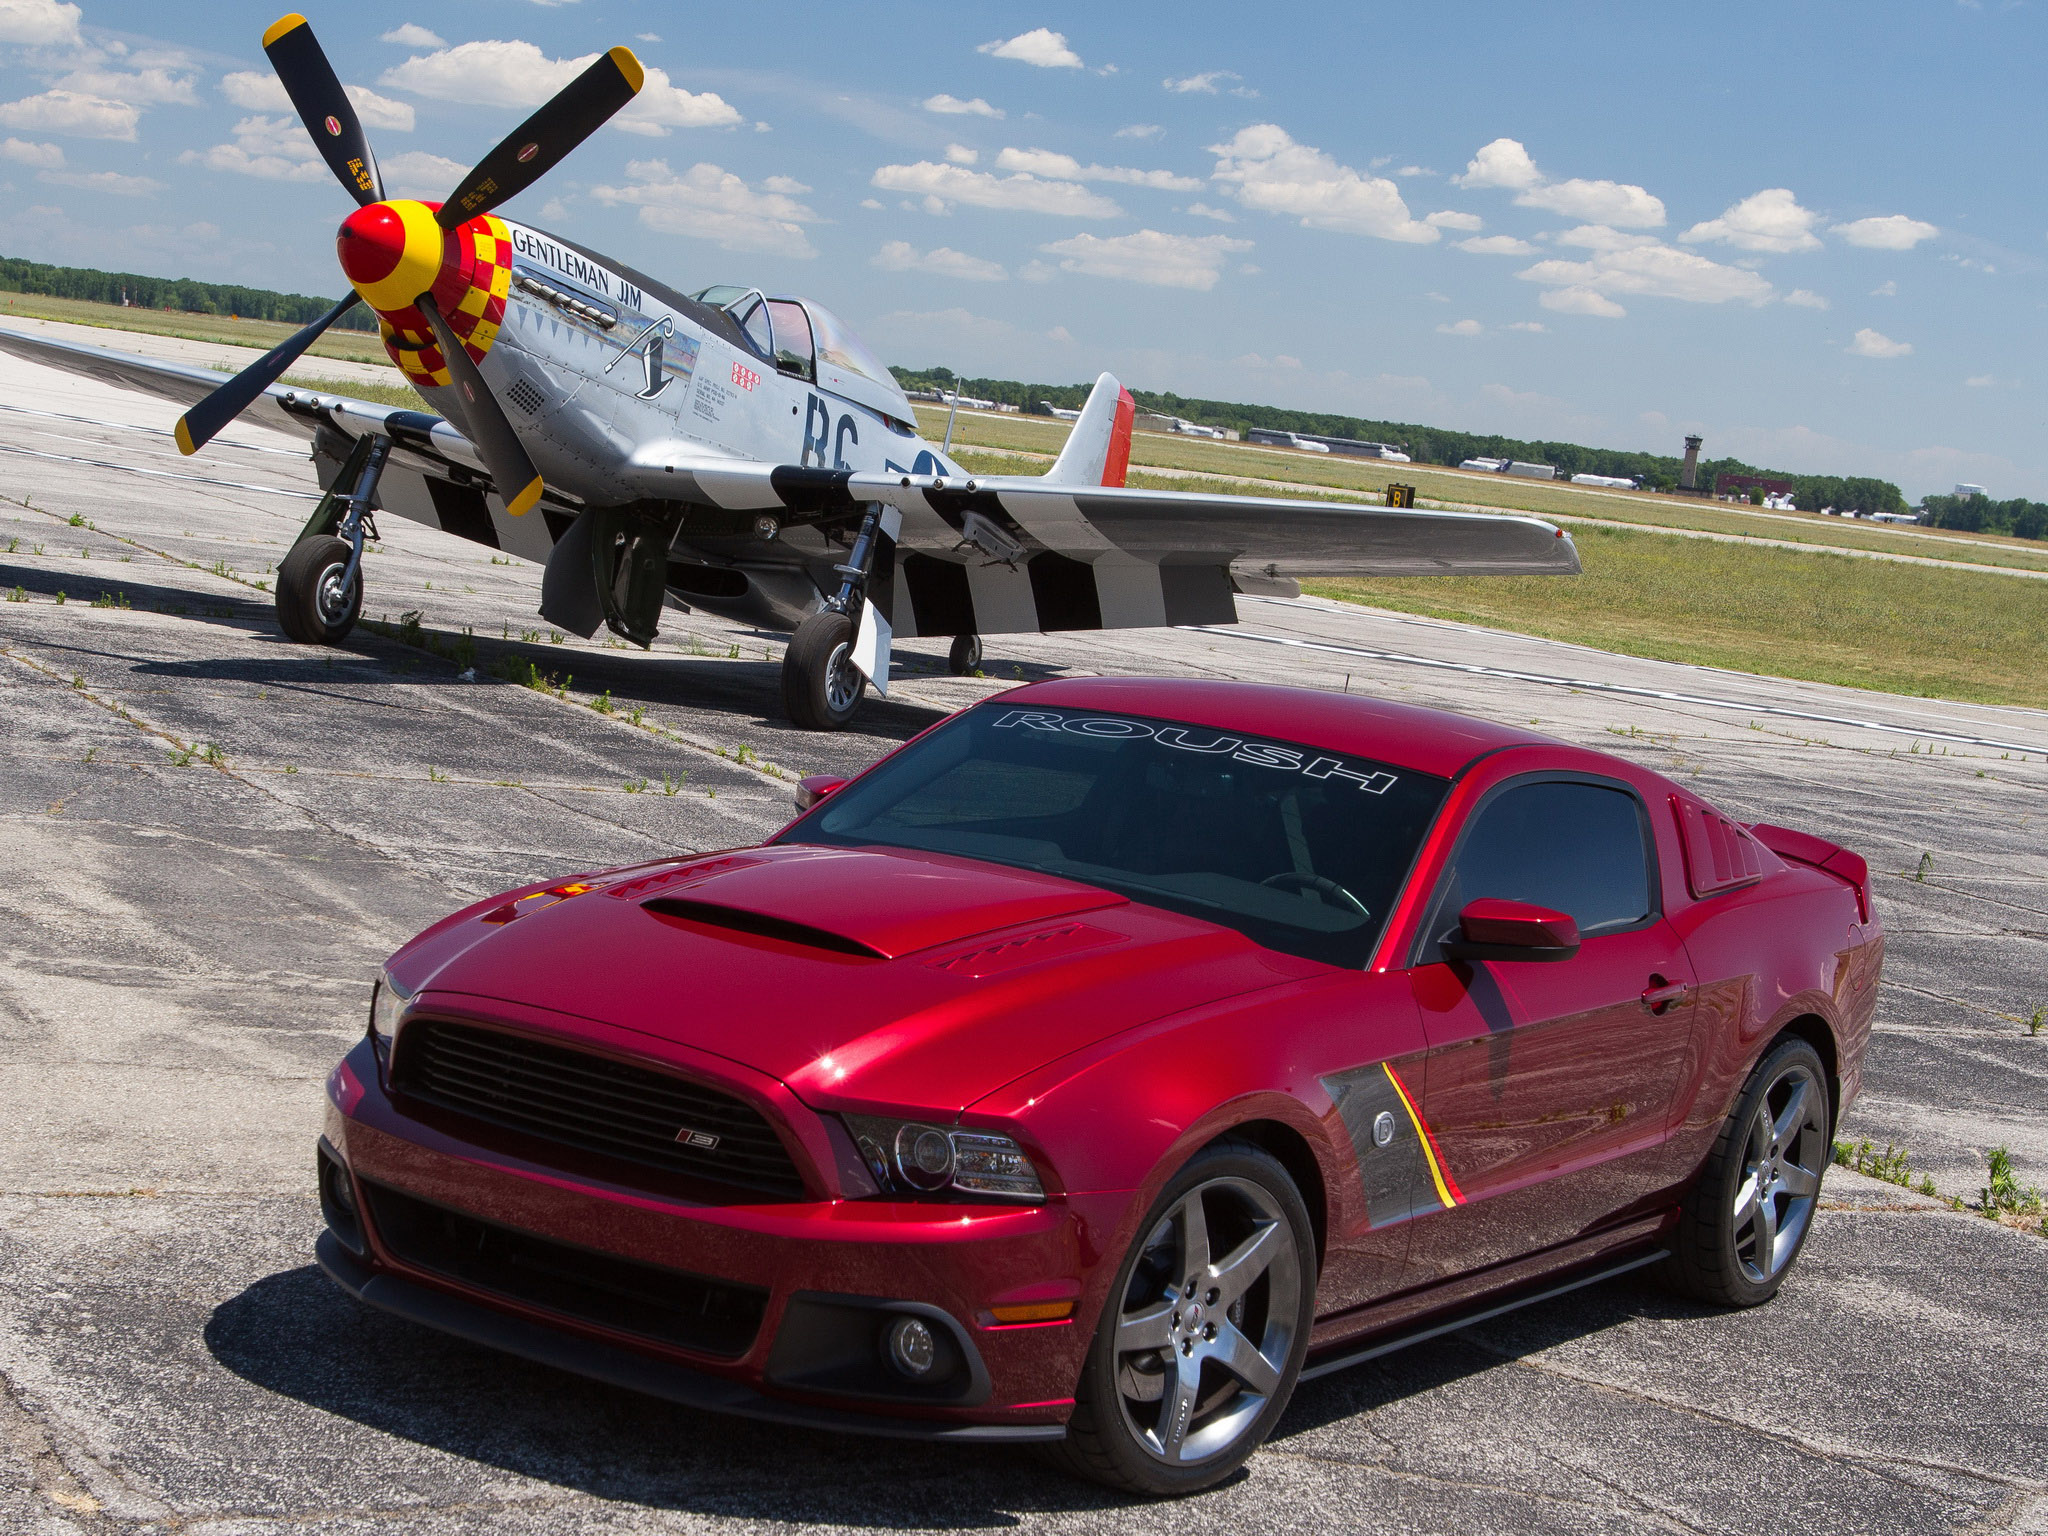 2013, Roush, Ford, Mustang, Stage 3, Muscle, Supercar, Supercars, Airplane, Plane, Retro, Military Wallpaper